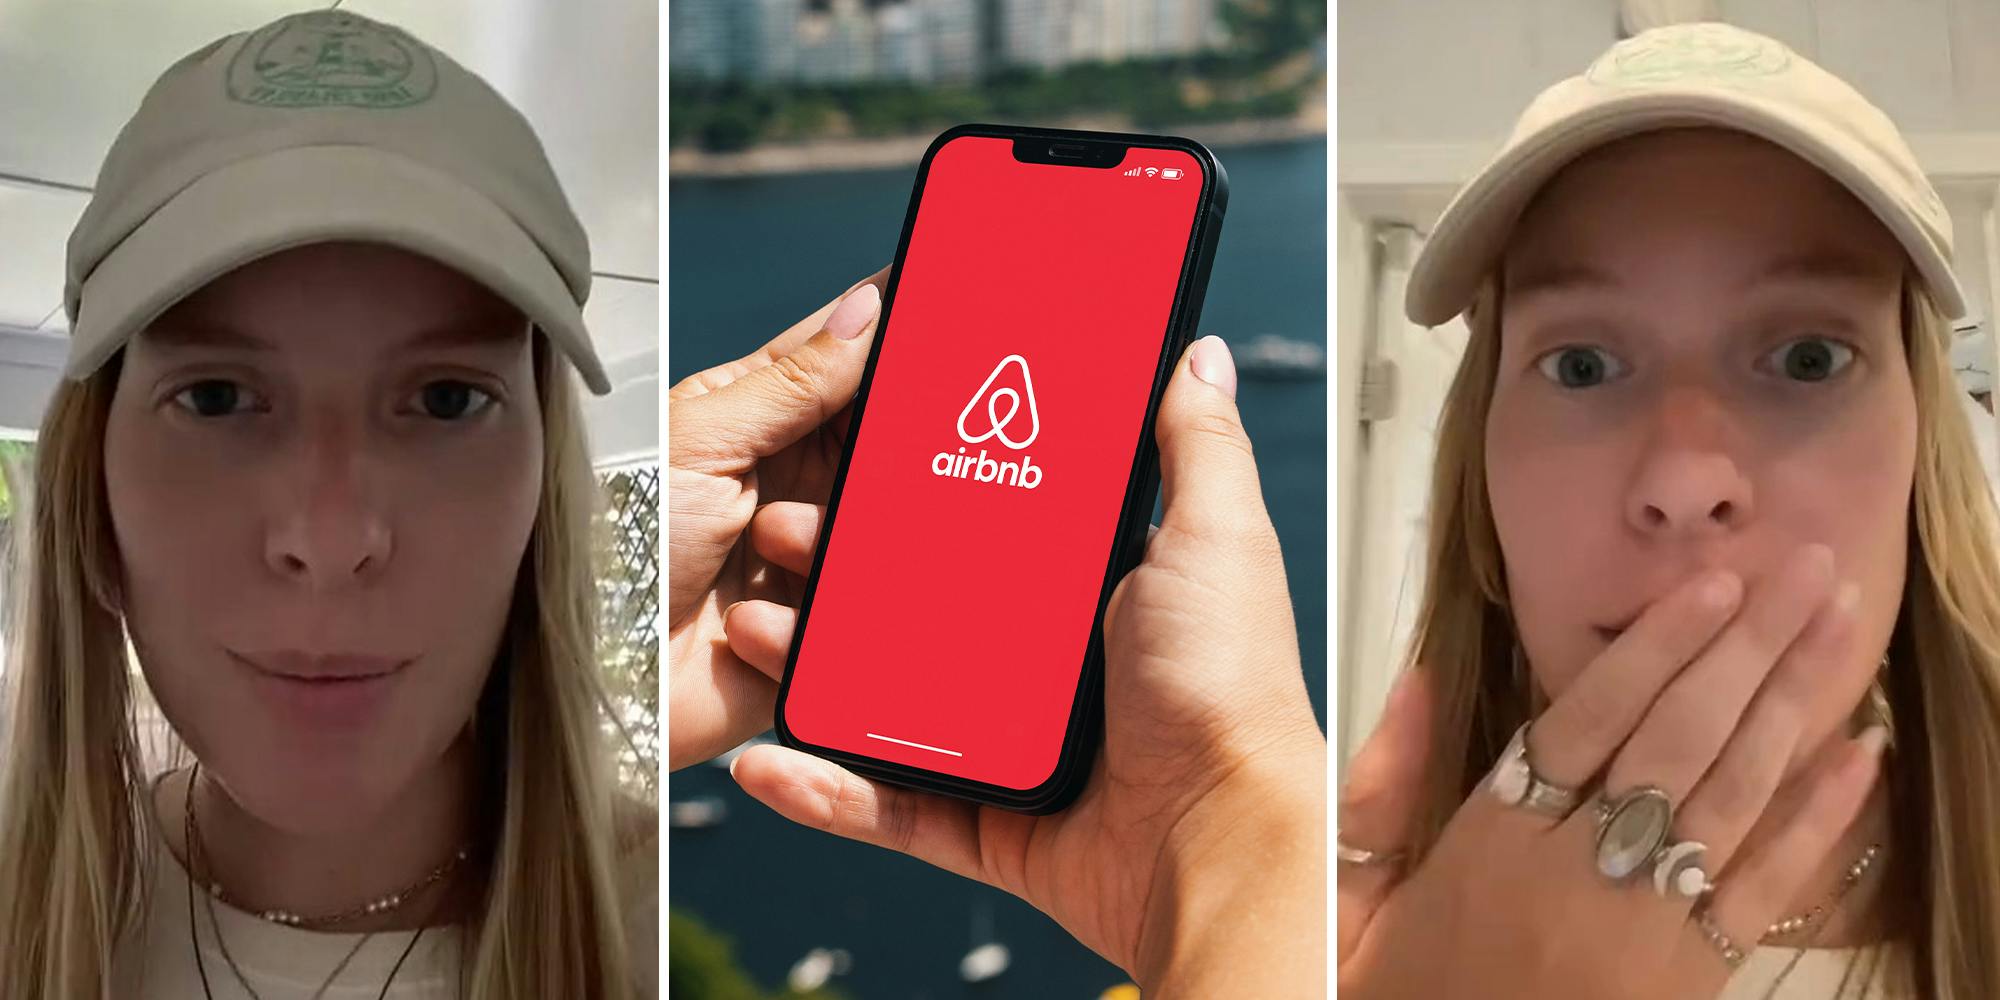 Woman rents Airbnb without seeing its photos beforehand. She can’t believe what’s inside